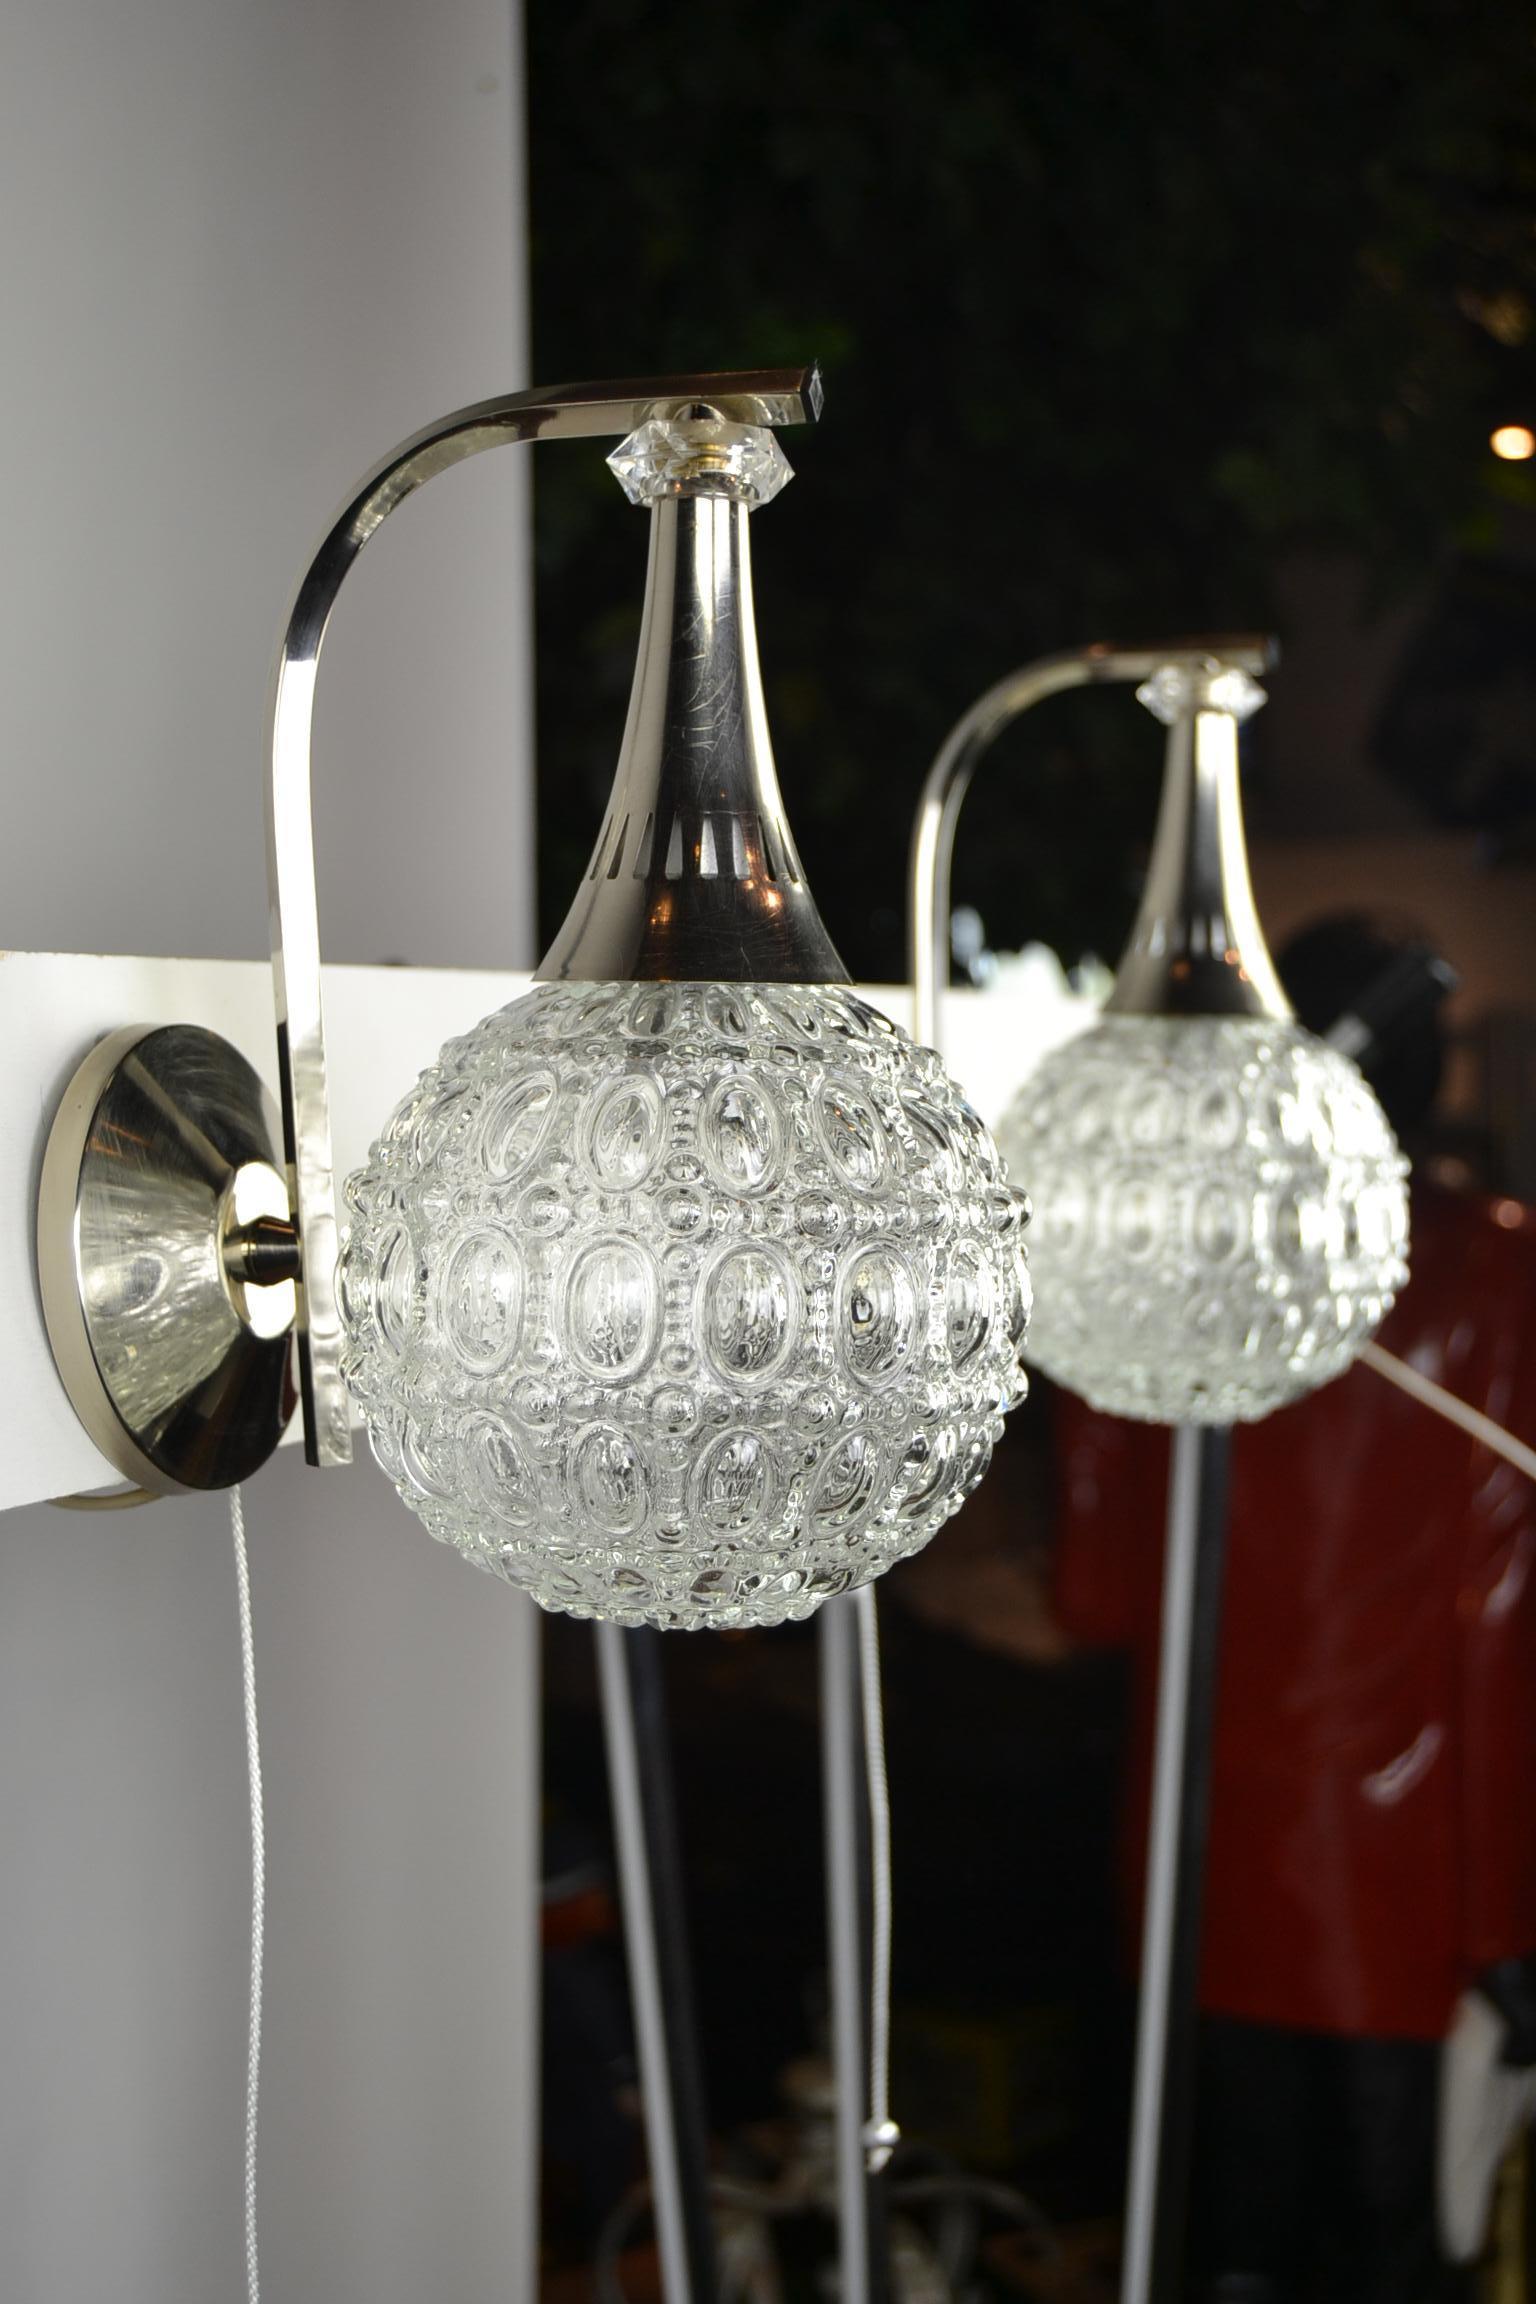 Elegant set of 2 Vintage Teardrop Wall Scones or Wall Lights of  Glass and Chrome from the 1960s. These Droplet Lights have a chromed base with a cut plexiglass detail  on top and a bubbled glass lampshade.

It's a stylish pair for bathroom,